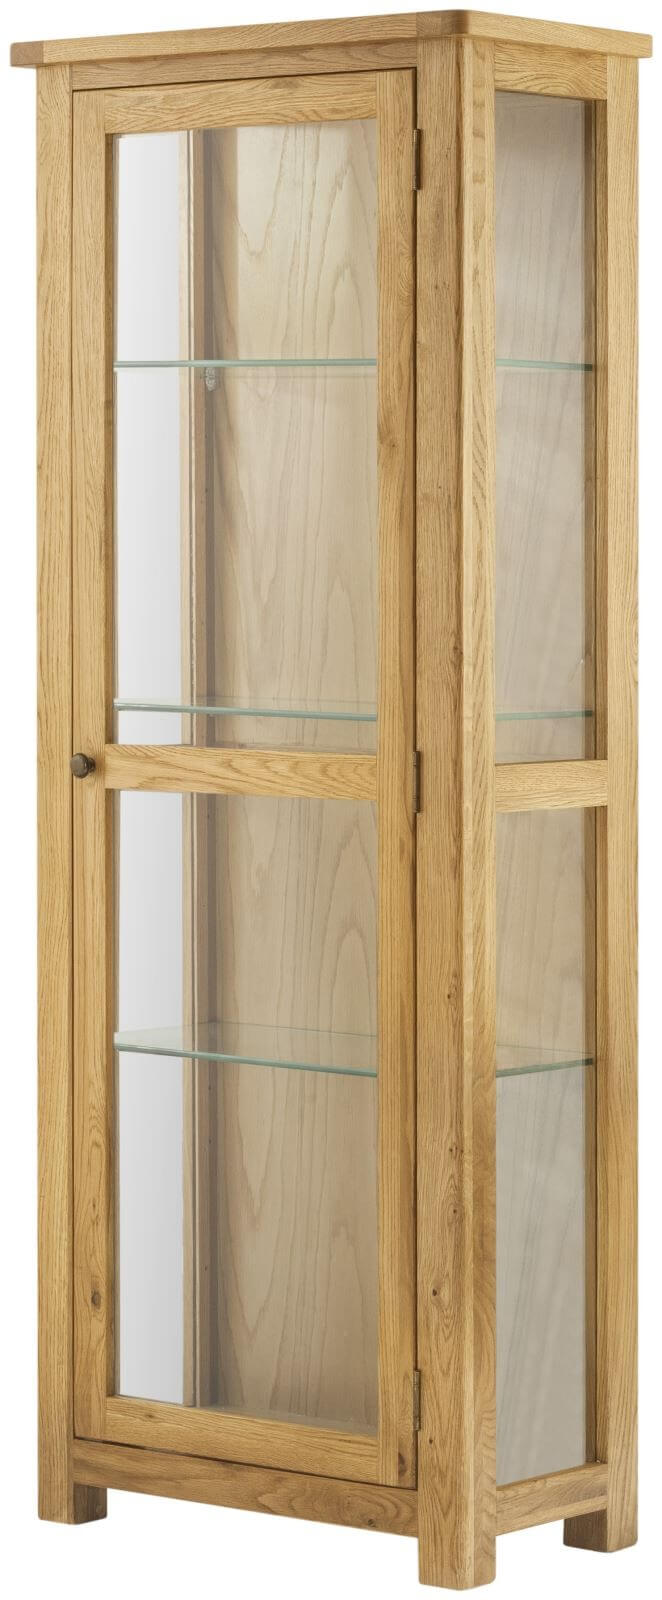 Showing image for Seattle display cabinet - oak